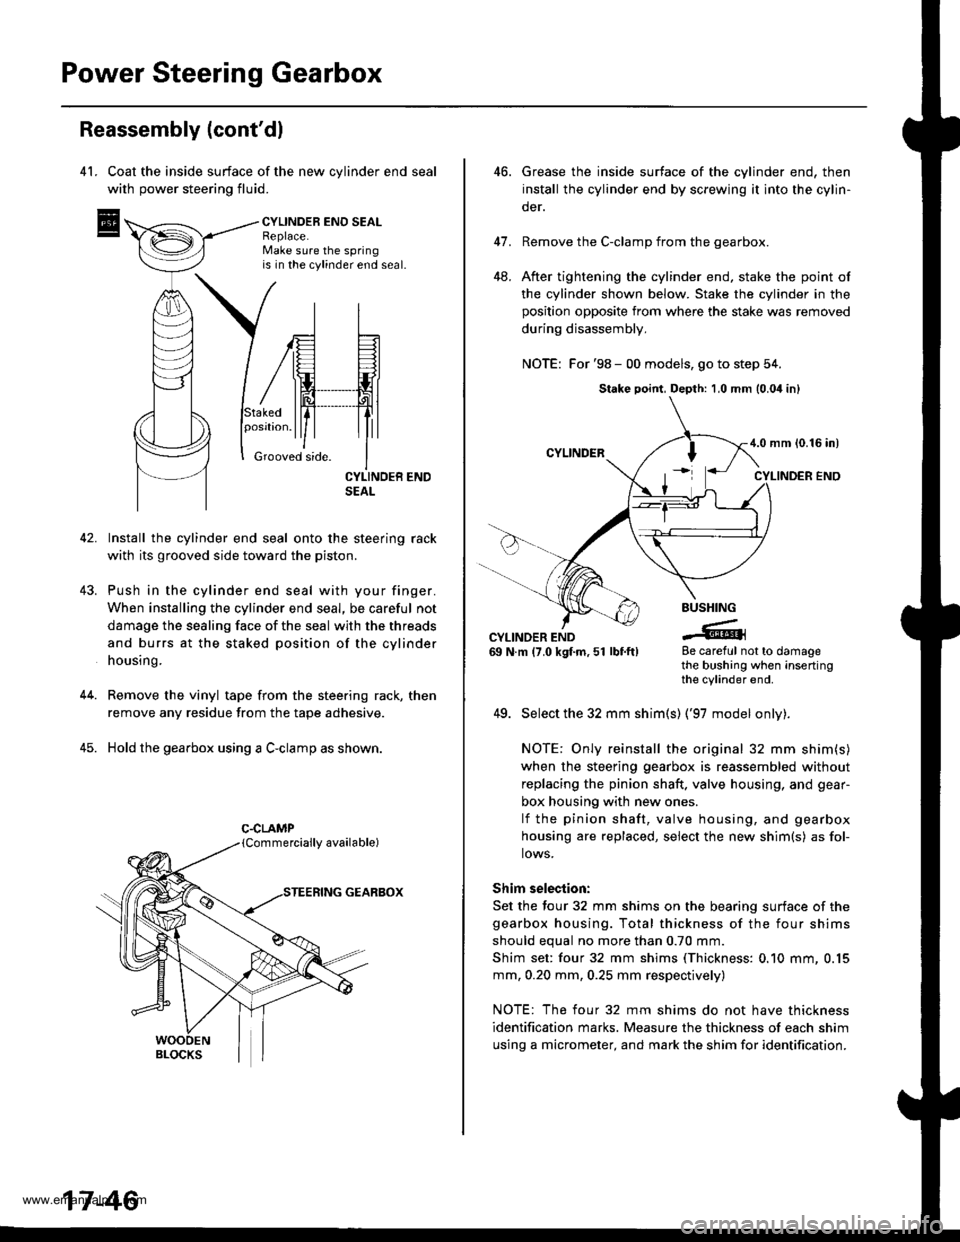 HONDA CR-V 1998 RD1-RD3 / 1.G User Guide 
Power Steering Gearbox
Reassembly (contdl
4l. Coat the inside surface of the new cvlinder end seal
with power steering fluid.
CYLINDEB ENO SEALReplace.Make sure the springis in the cylinder end seal